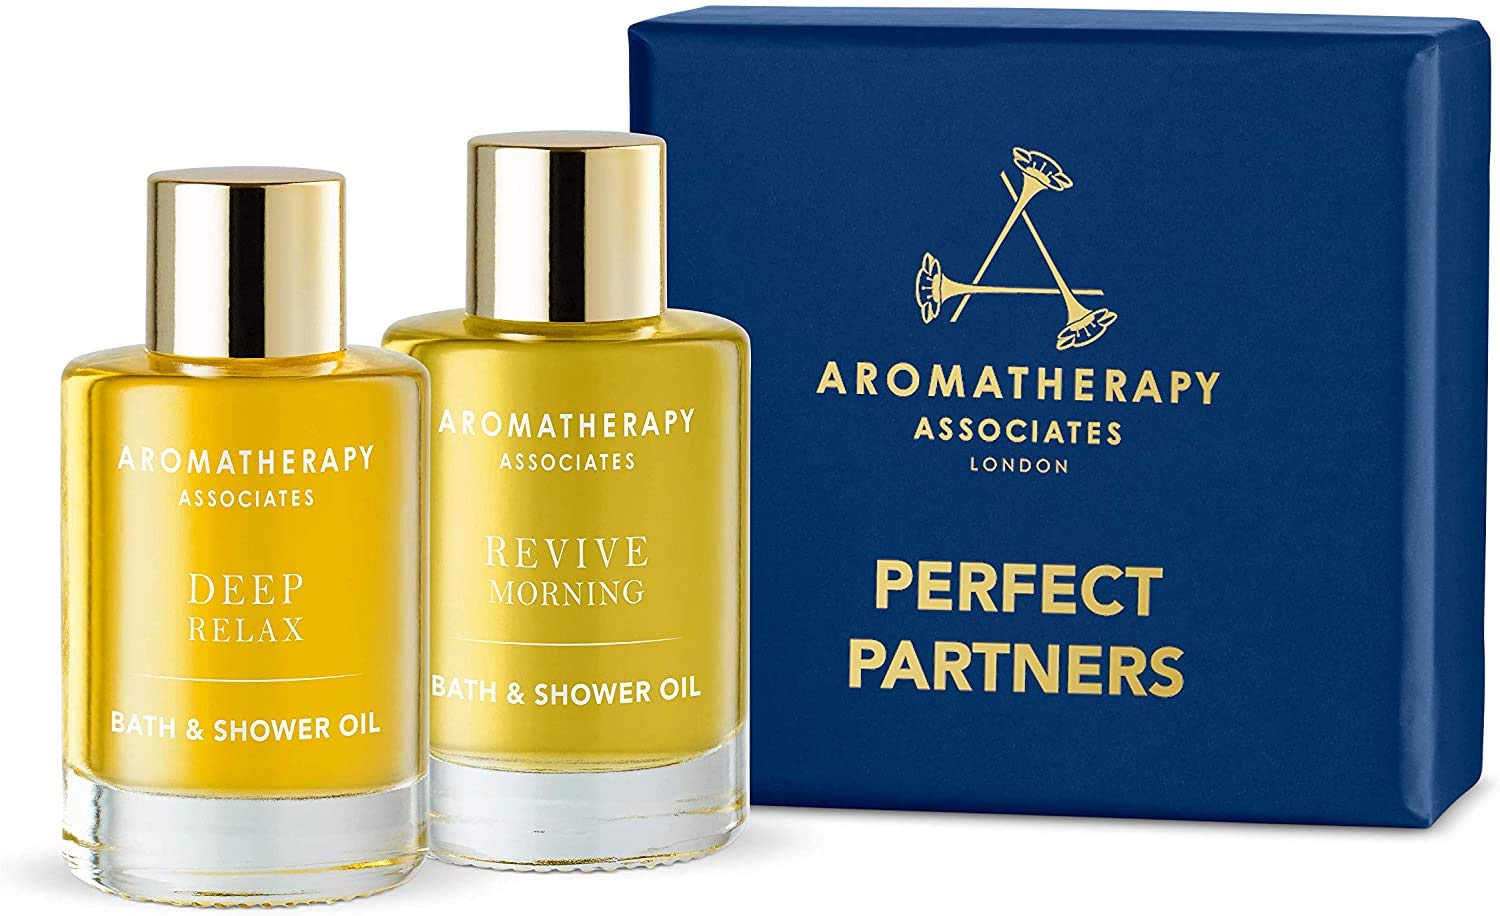 Aromatherapy Associates Perfect Partners Gift Set. 2 Premium Bath and Shower Oils (0.3 fl oz Each) in Decorative Gift Box. Includes Deep Relax and Revive Morning Blends